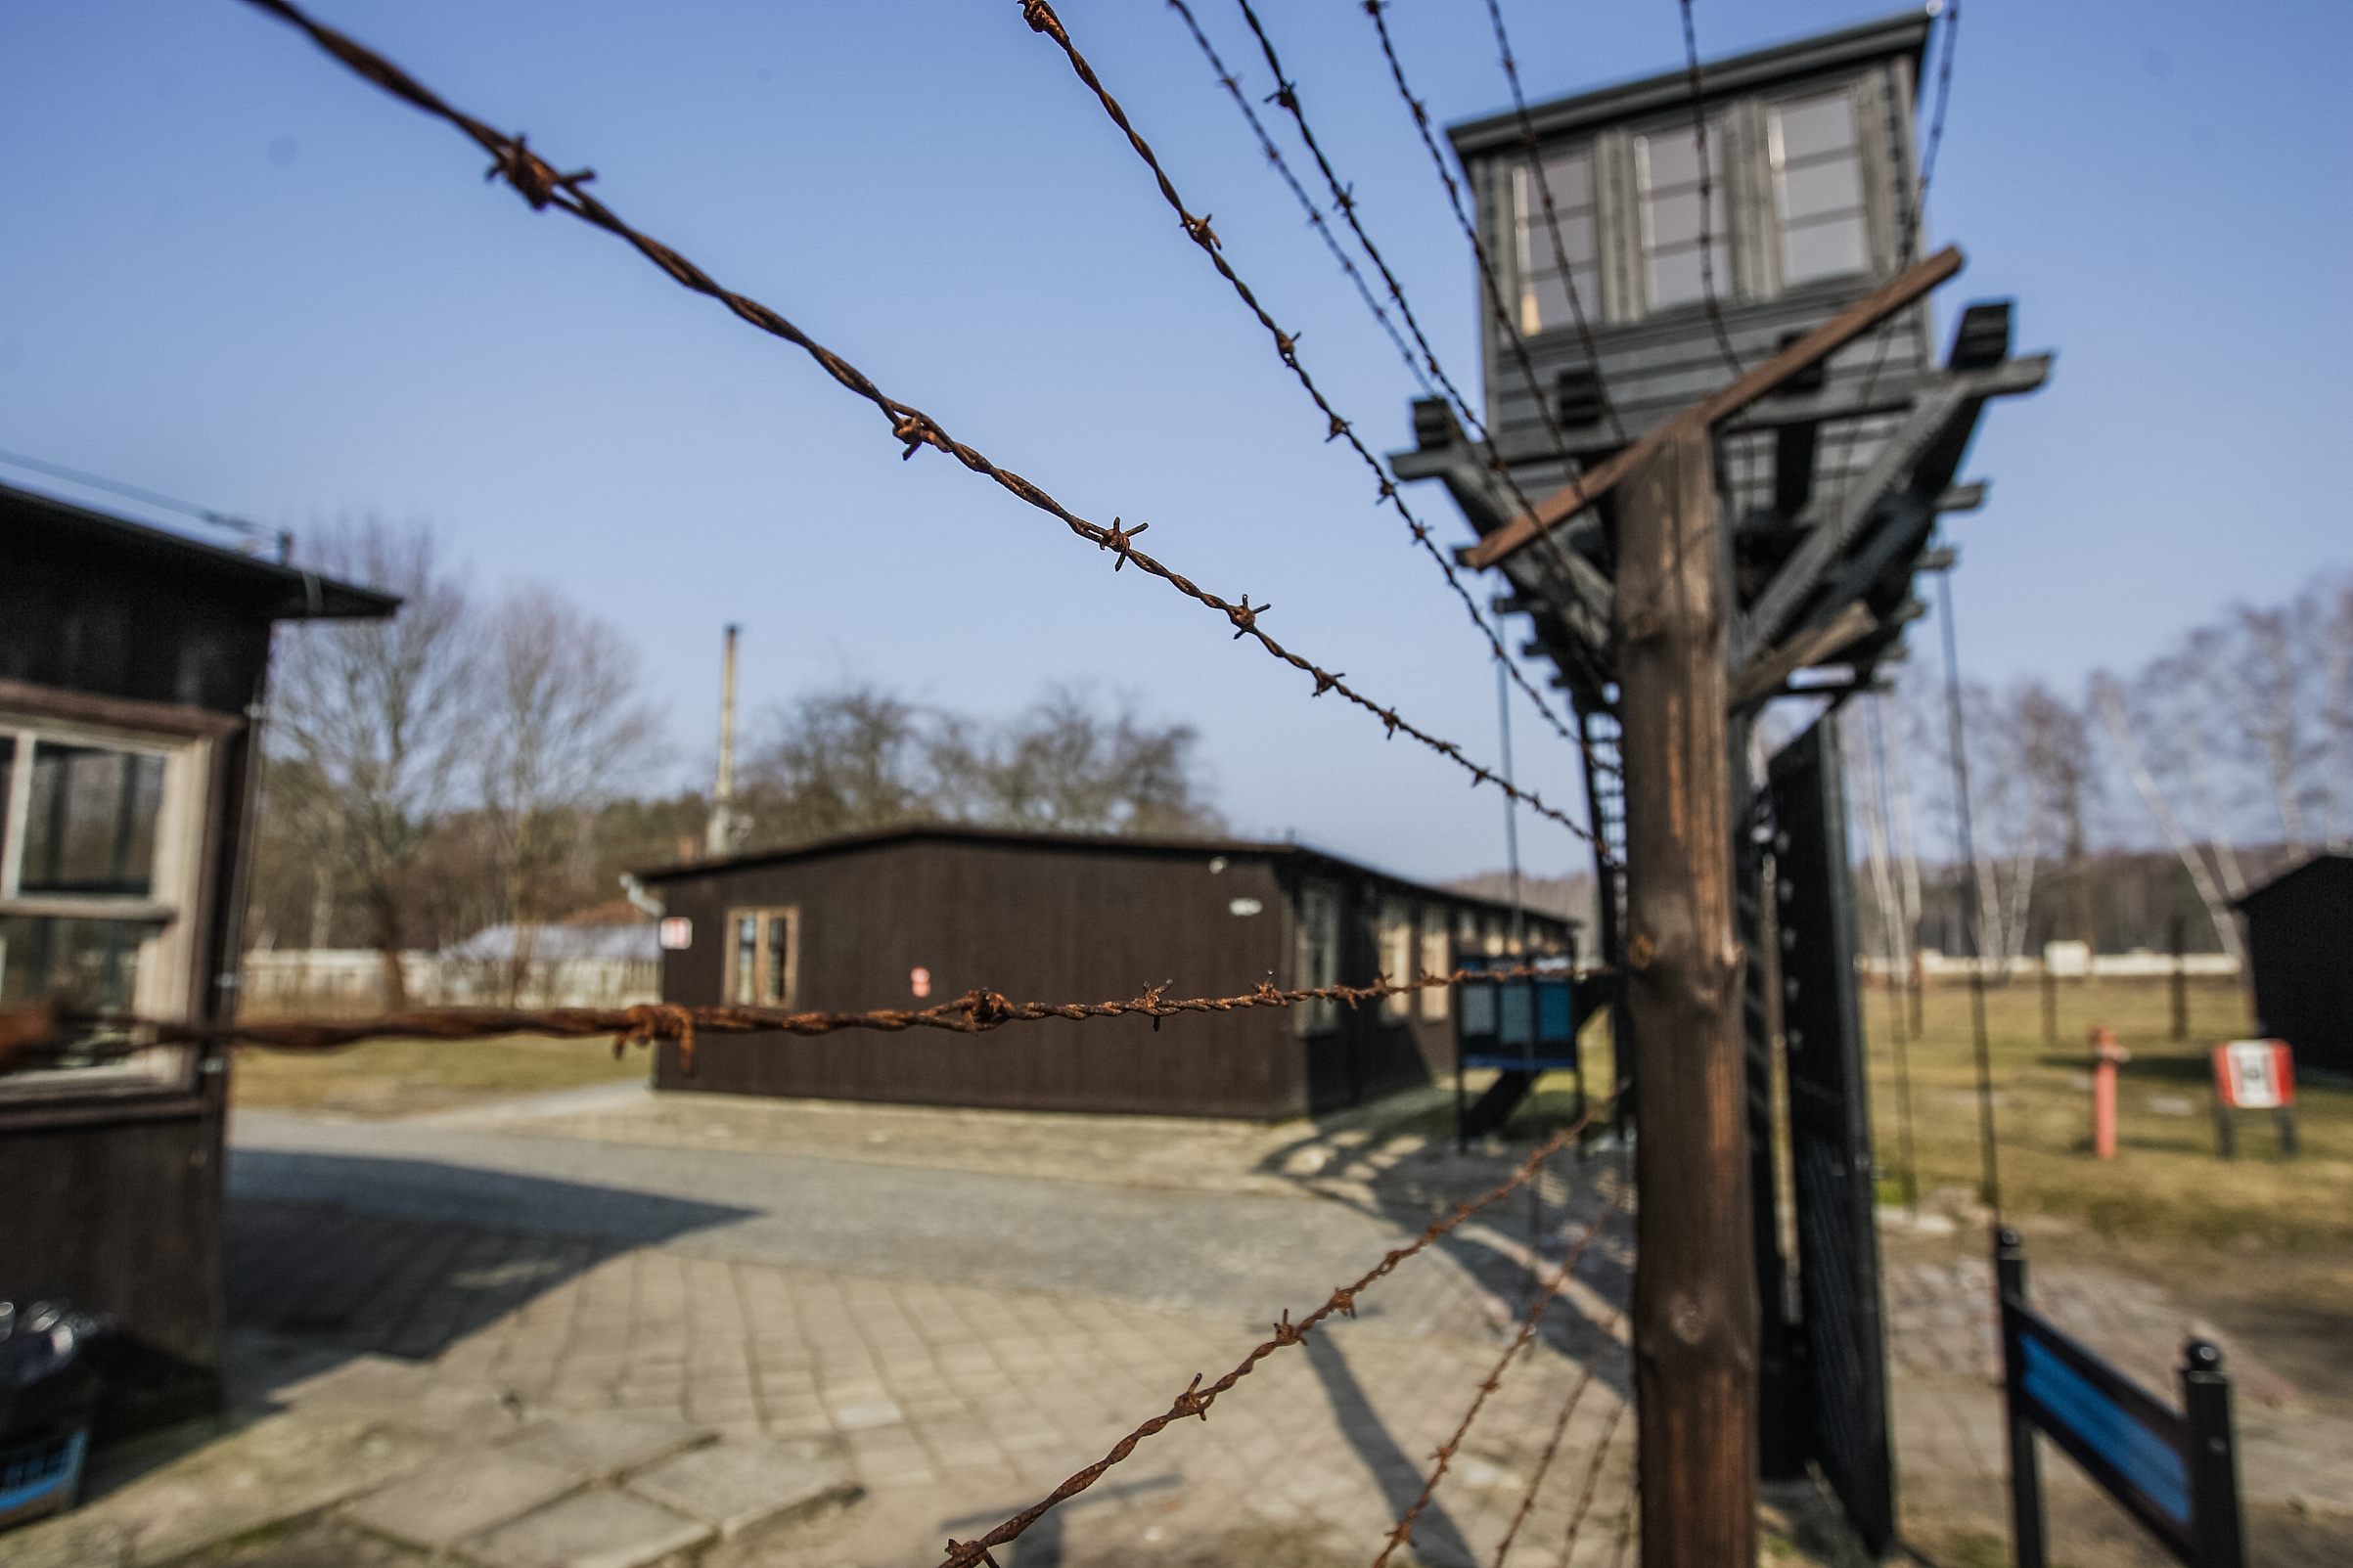 Former Nazi German Concentration Camp Stutthof in Sztutowo